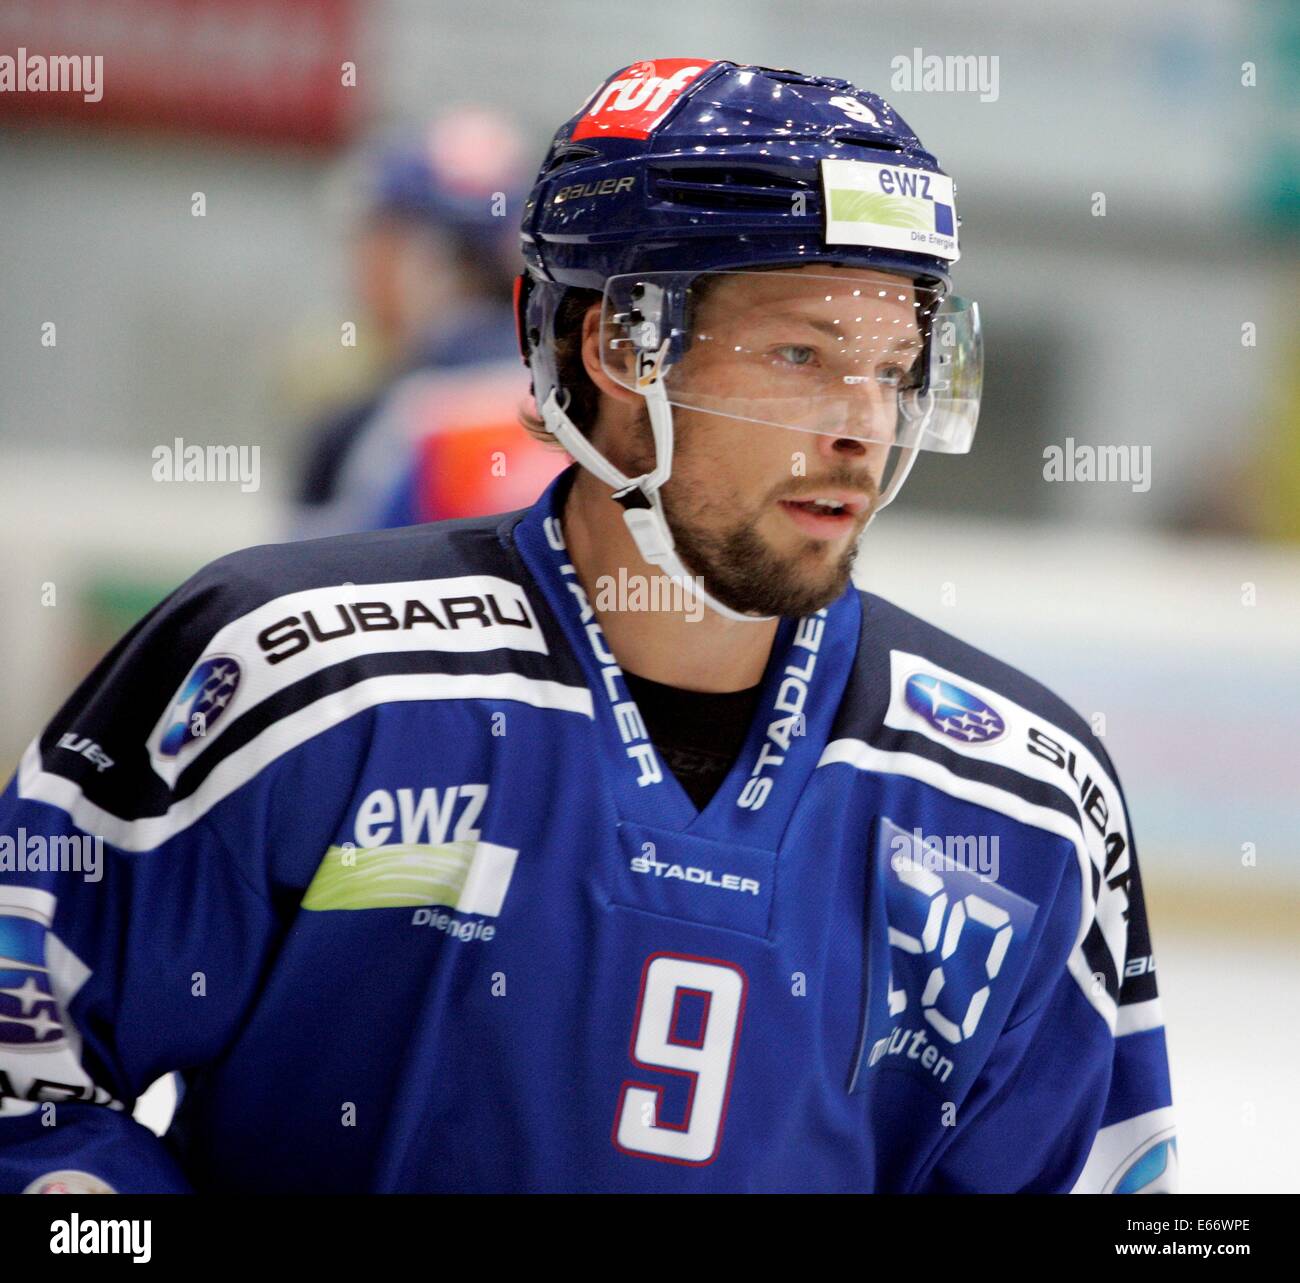 Bad Toelz, Bavaria, Germany. 15th Aug, 2014. Robert NILSSON/SWE/Mannheim, .two top teams from Germany and Switzerland meet for a ice hockey friendly as preparation for the season, ZSC Lions Zuerich vs Adler Mannheim, August 15, 2014, Bad Toelz, Germany, Credit:  Wolfgang Fehrmann/Wolfgang Fehrmann/ZUMA Wire/Alamy Live News Stock Photo